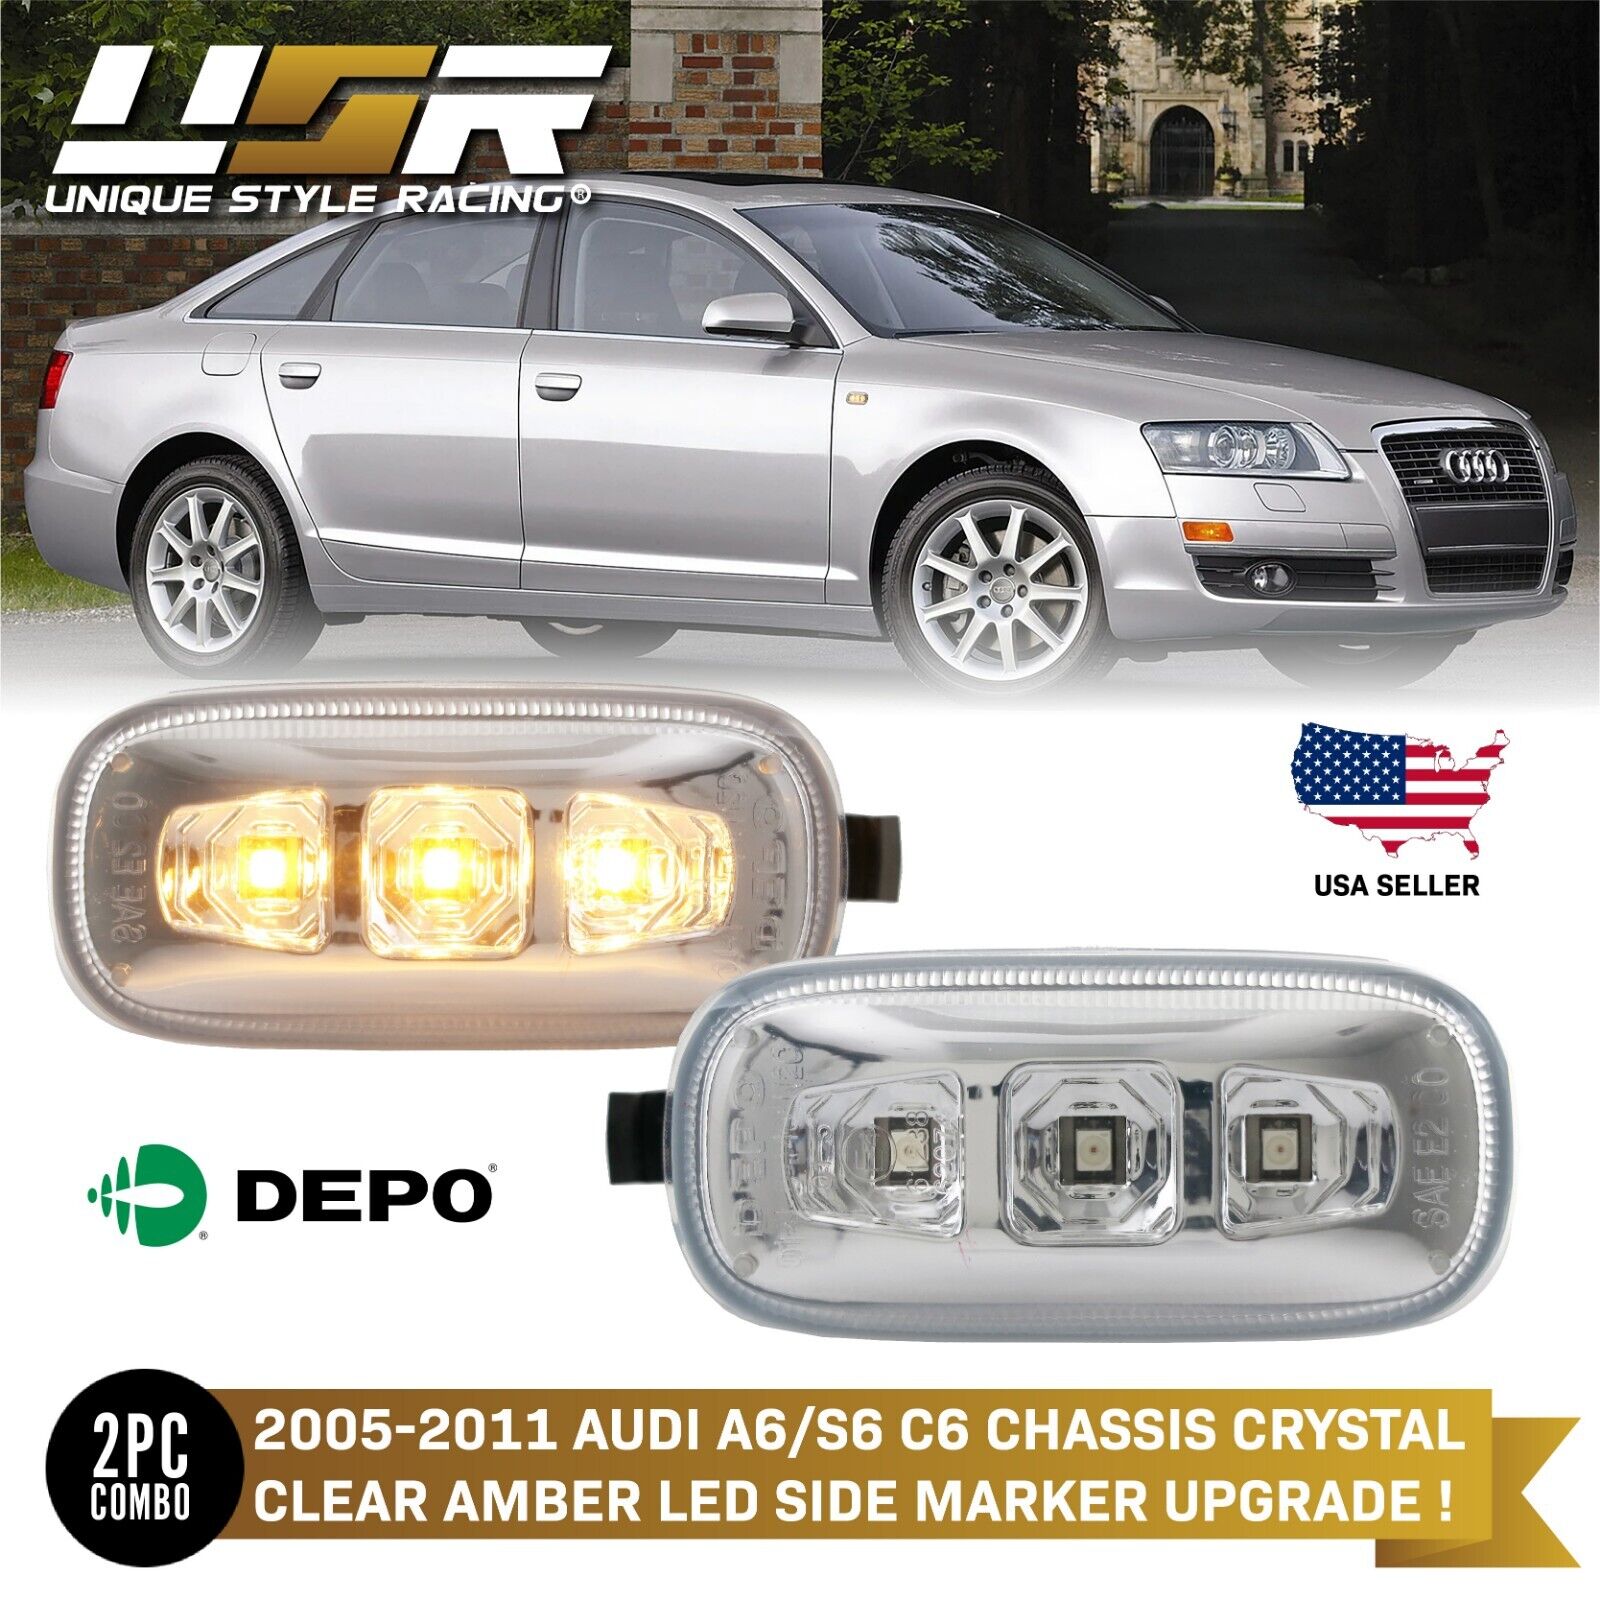 DEPO Clear Amber LED Fender Side Marker Light For Audi A4 S4 B6 B7 A6 C5 Allroad